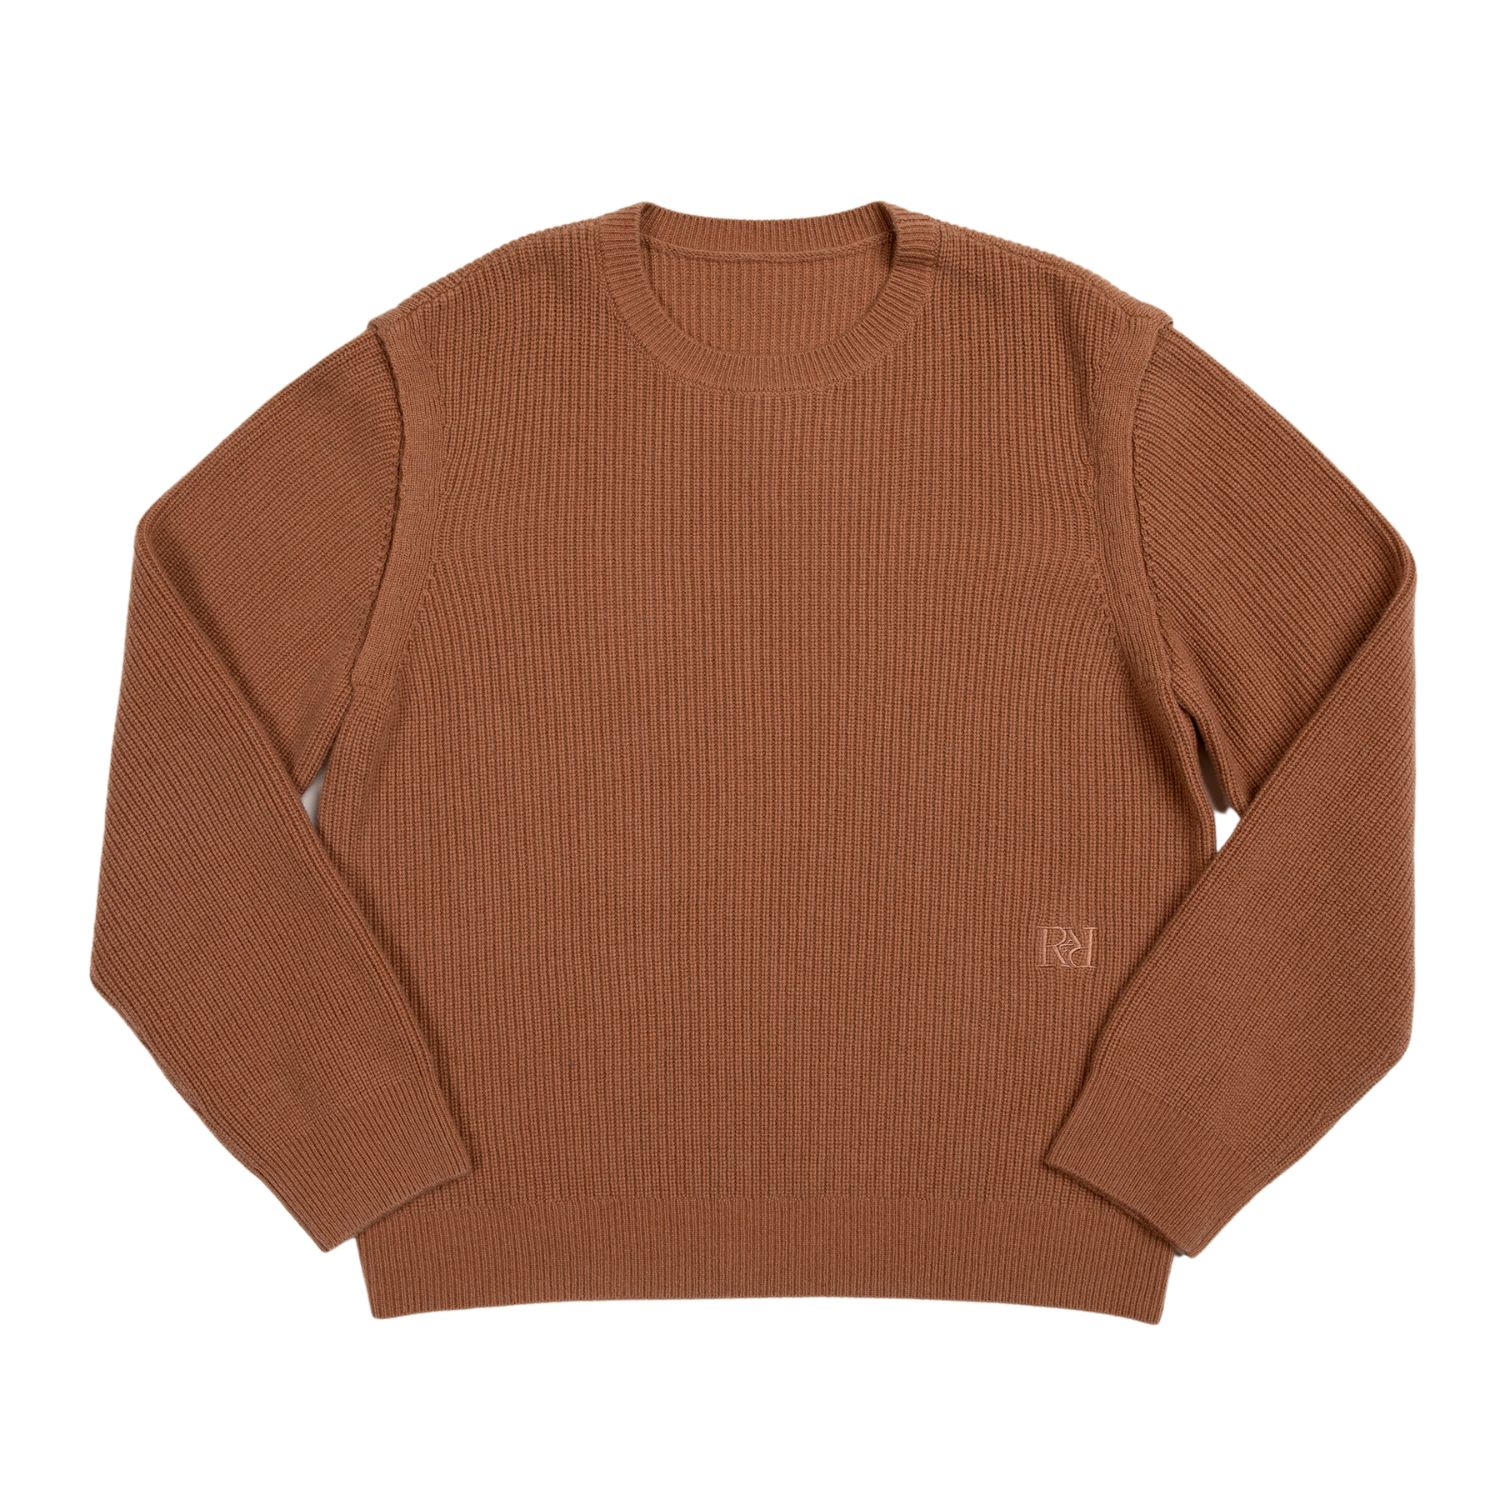 Women’s Brown Convertible Cashmere Sweater - Toast Extra Small Rest & Relax